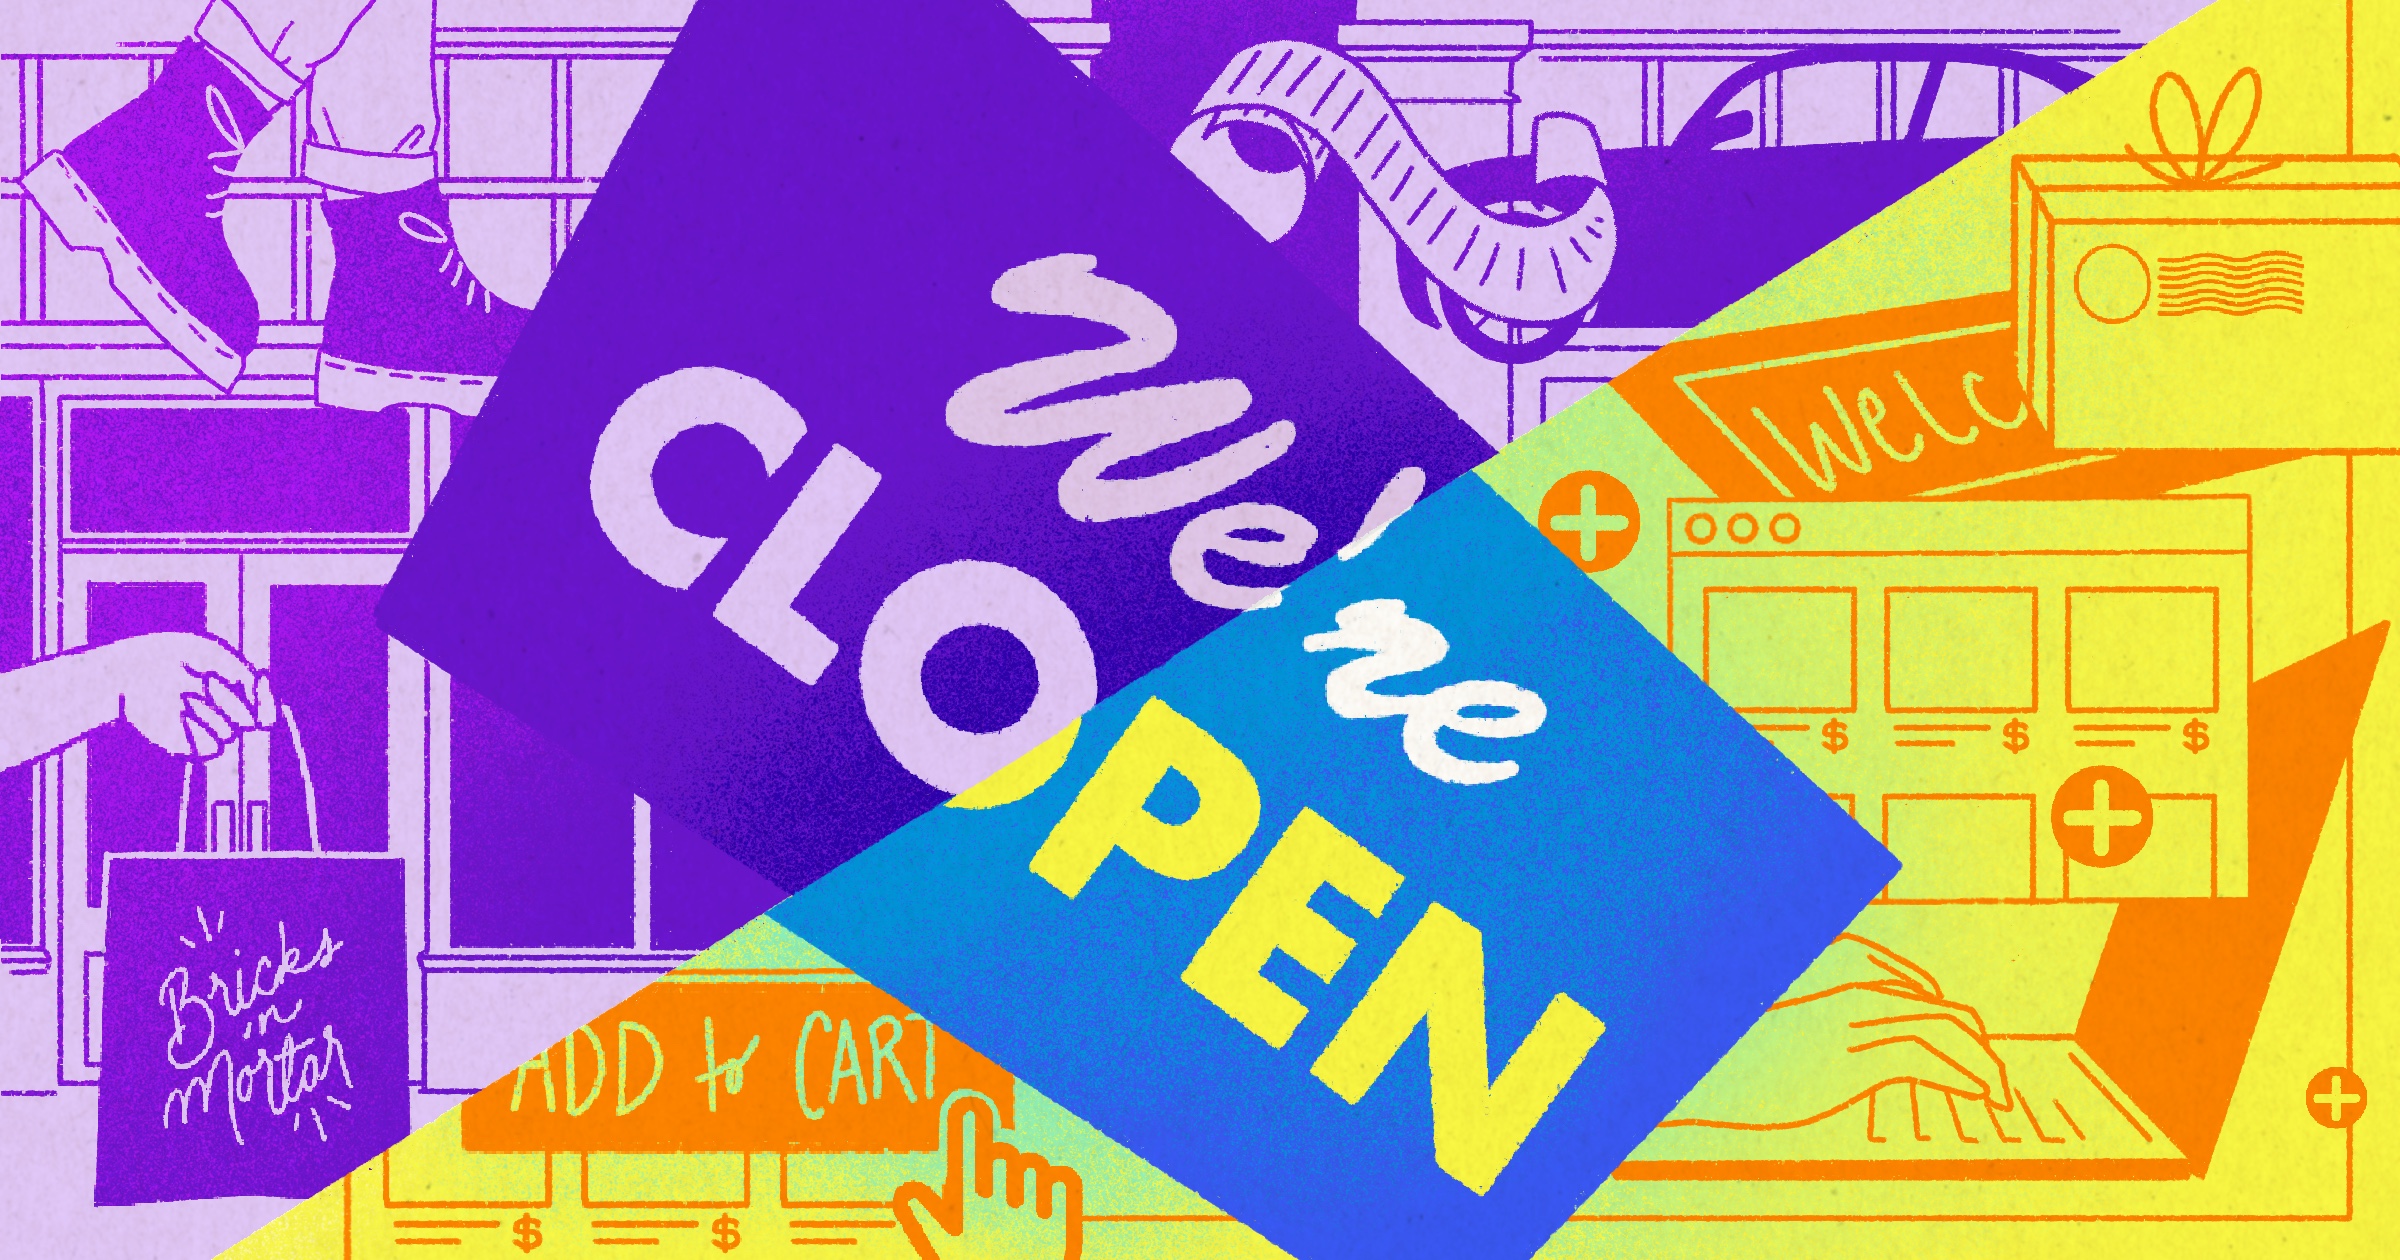 advantages of ecommerce. Graphic is a purple and yellow diagonal split with half stating "we're open" and the other half stating "we're closed".